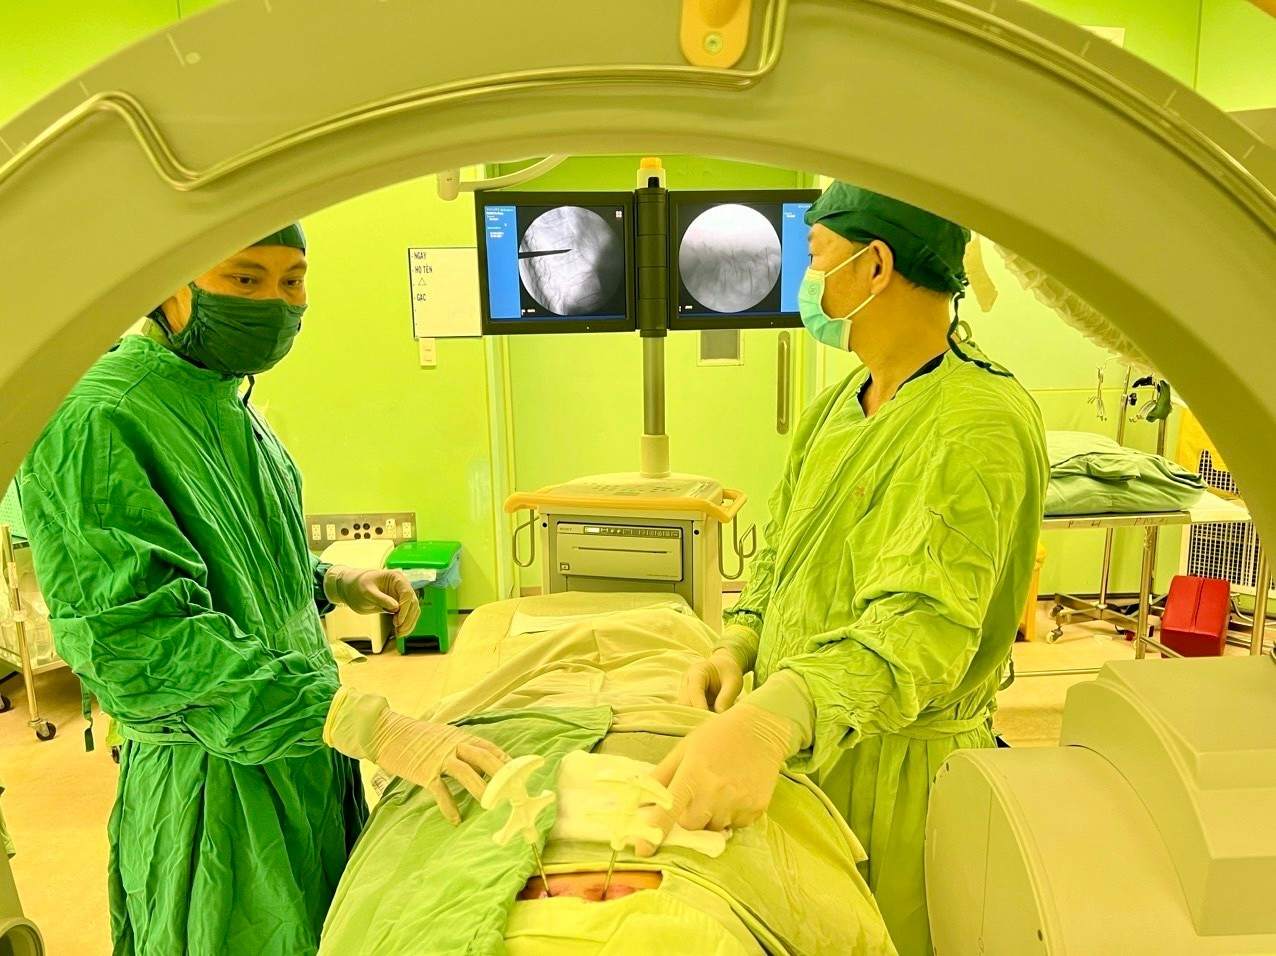 A group of people in green scrubs and masks in a hospital room

Description automatically generated